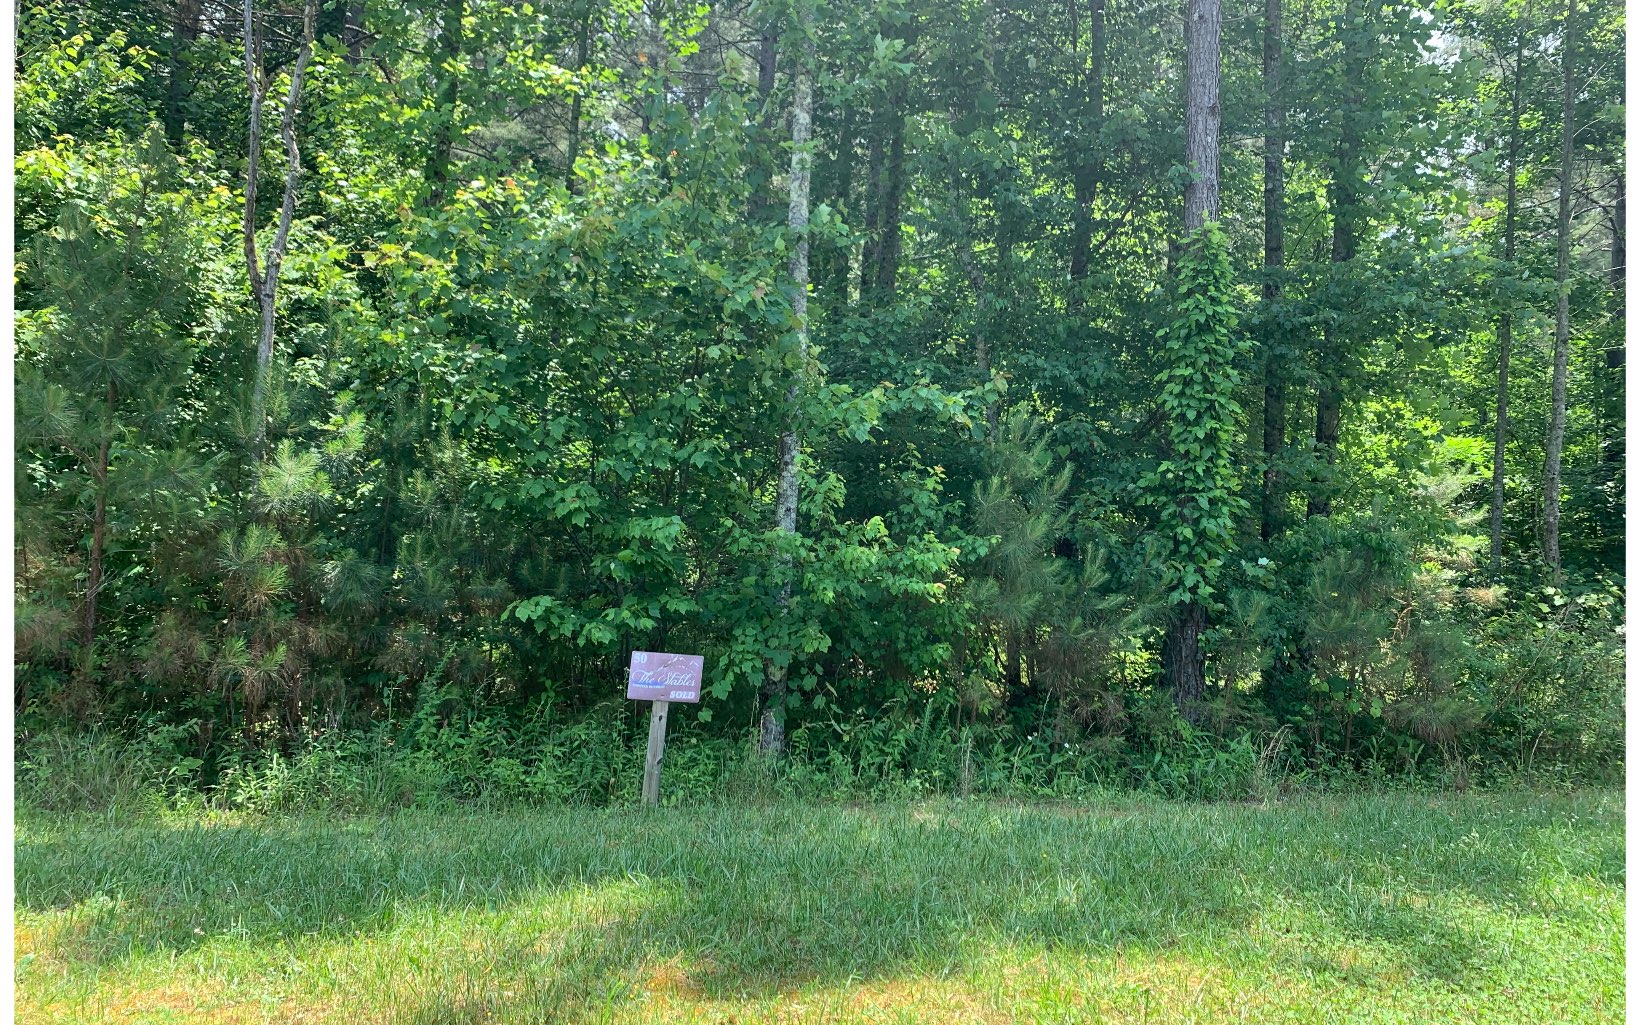 Fantastic lot located in 1300. You don't want to miss the opportunity to have access to all that the community has to offer. 4.35 acres with the perfect spot to build your dream home.